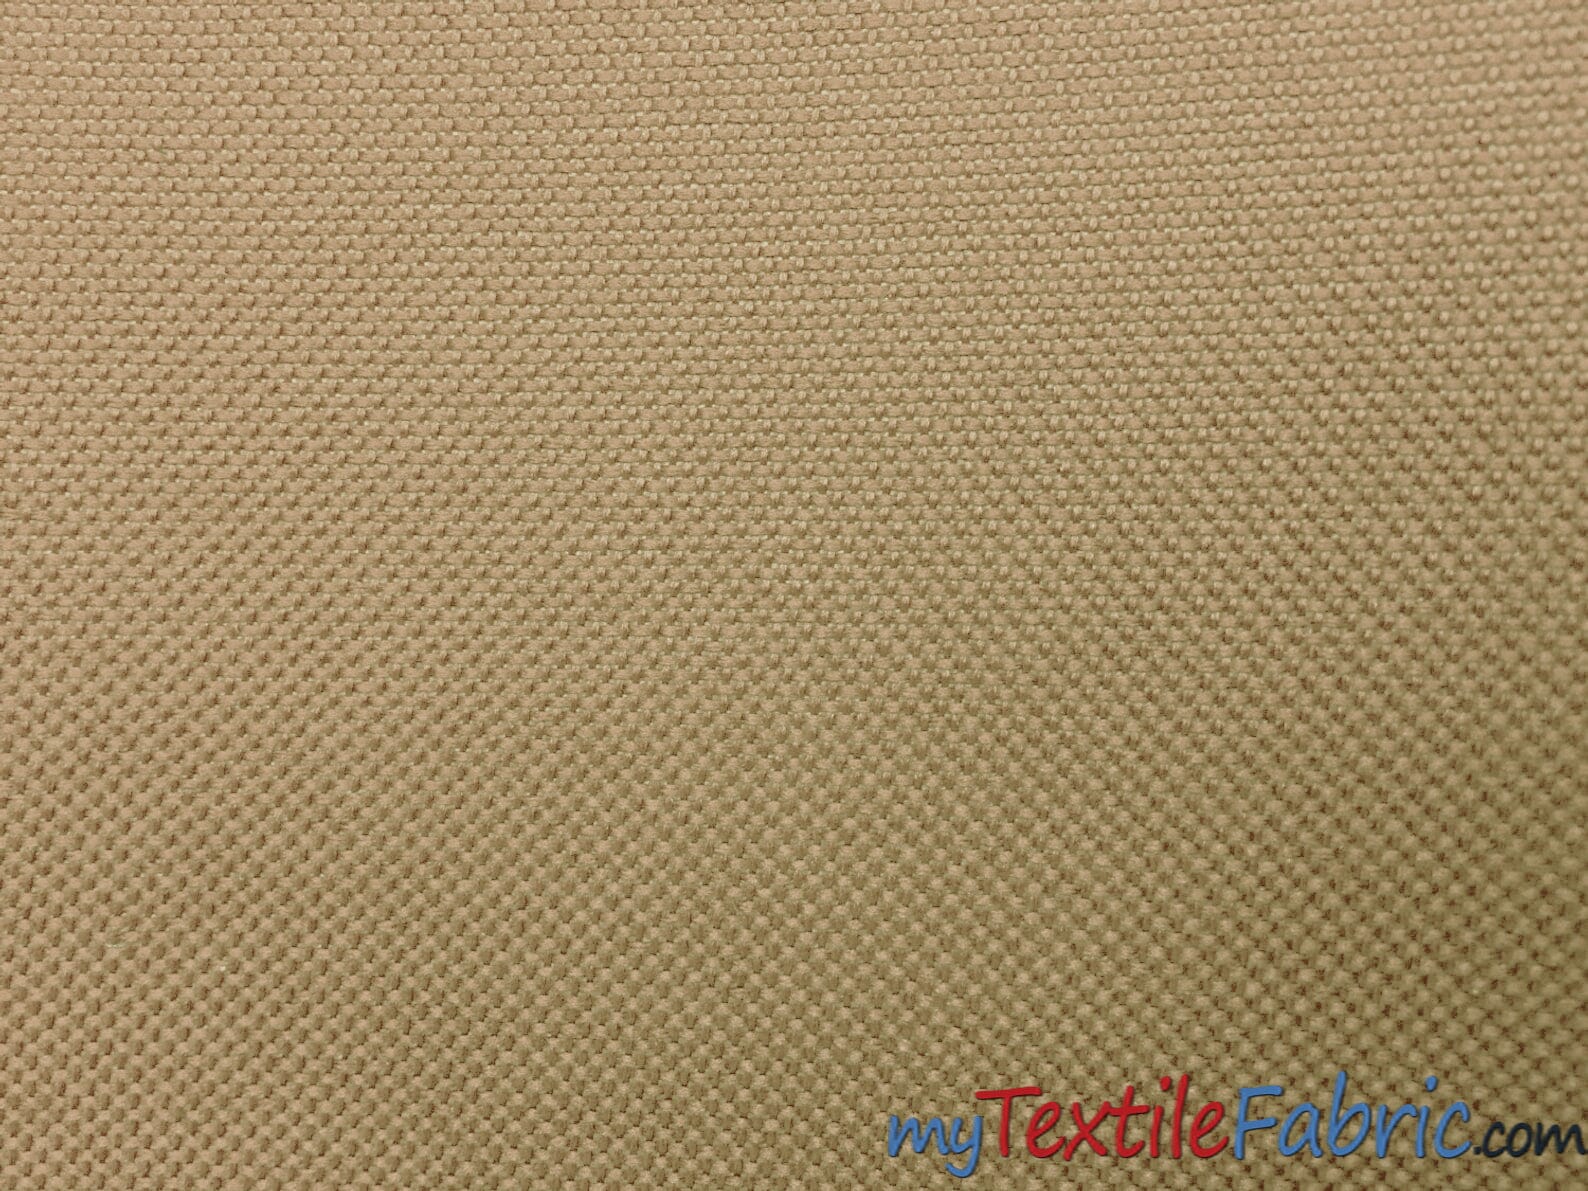 Waterproof Sun Repellent Canvas Fabric | 58" Wide | 100% Polyester | Great for Outdoor Waterproof Pillows, Tents, Covers, Bags, Patio Fabric mytextilefabric Yards Khaki 